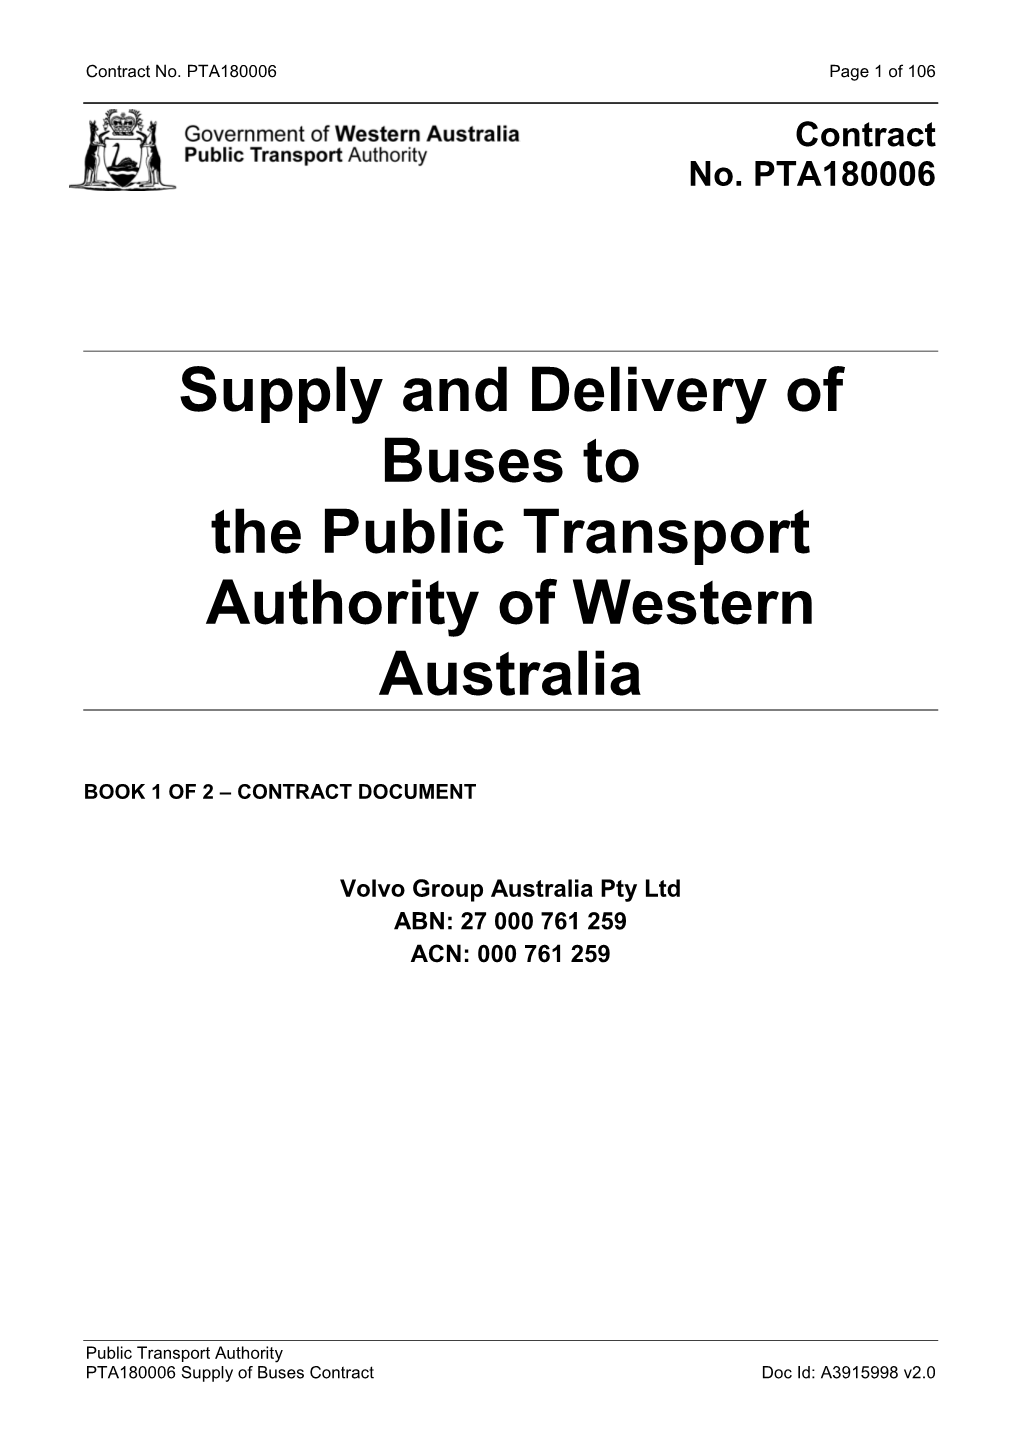 Supply and Delivery of Buses to the Public Transport Authority of Western Australia